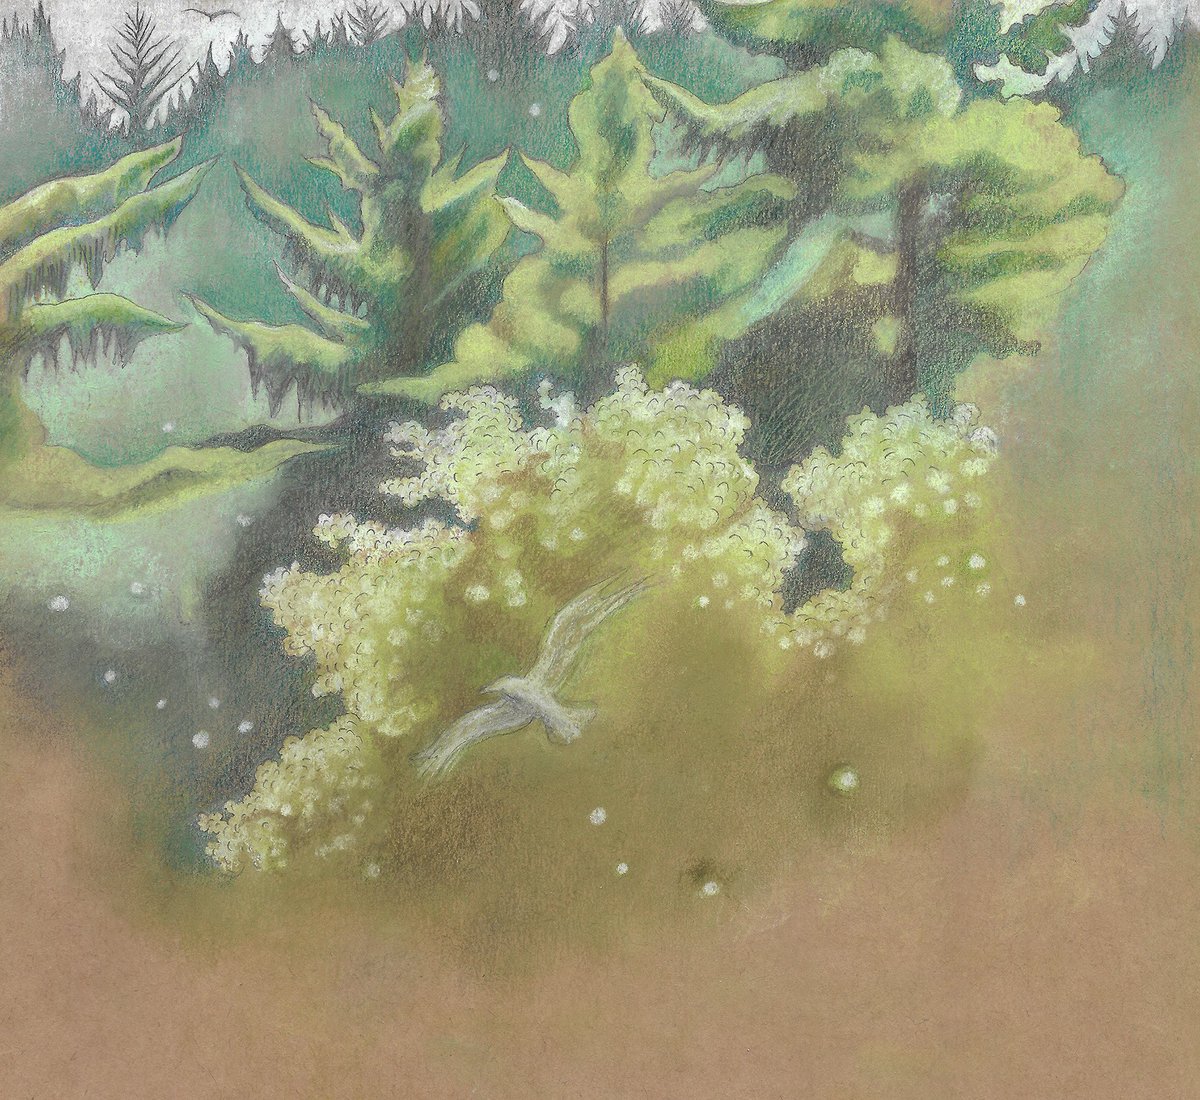 Oregon trees & river life drawing…peace & the flight of eagles & ospreys…’fairies’ drifting in the breeze…
Pastel & pencil drawing, Roseburg, Oregon, in the beautiful garden belonging to my in-laws. 

Drawing is available. 

#ElevensesHour #UKMakers #MHHSBD #oregon #drawing